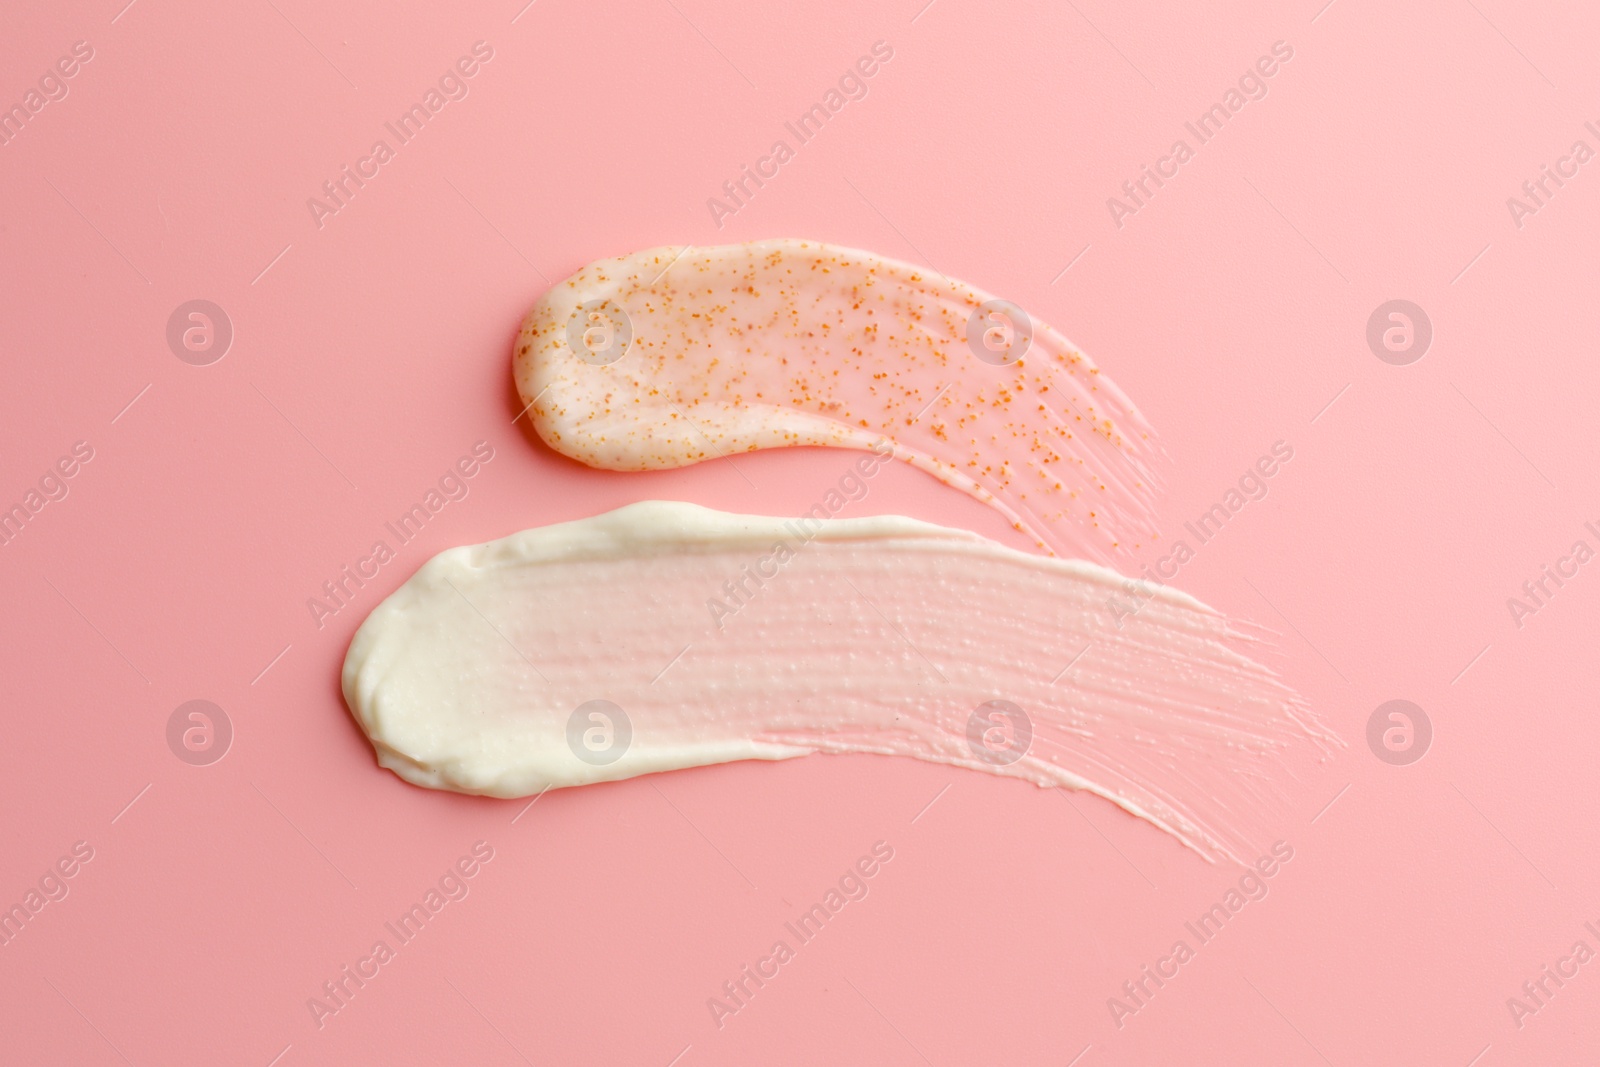 Photo of Samples of scrubs on pink background, top view